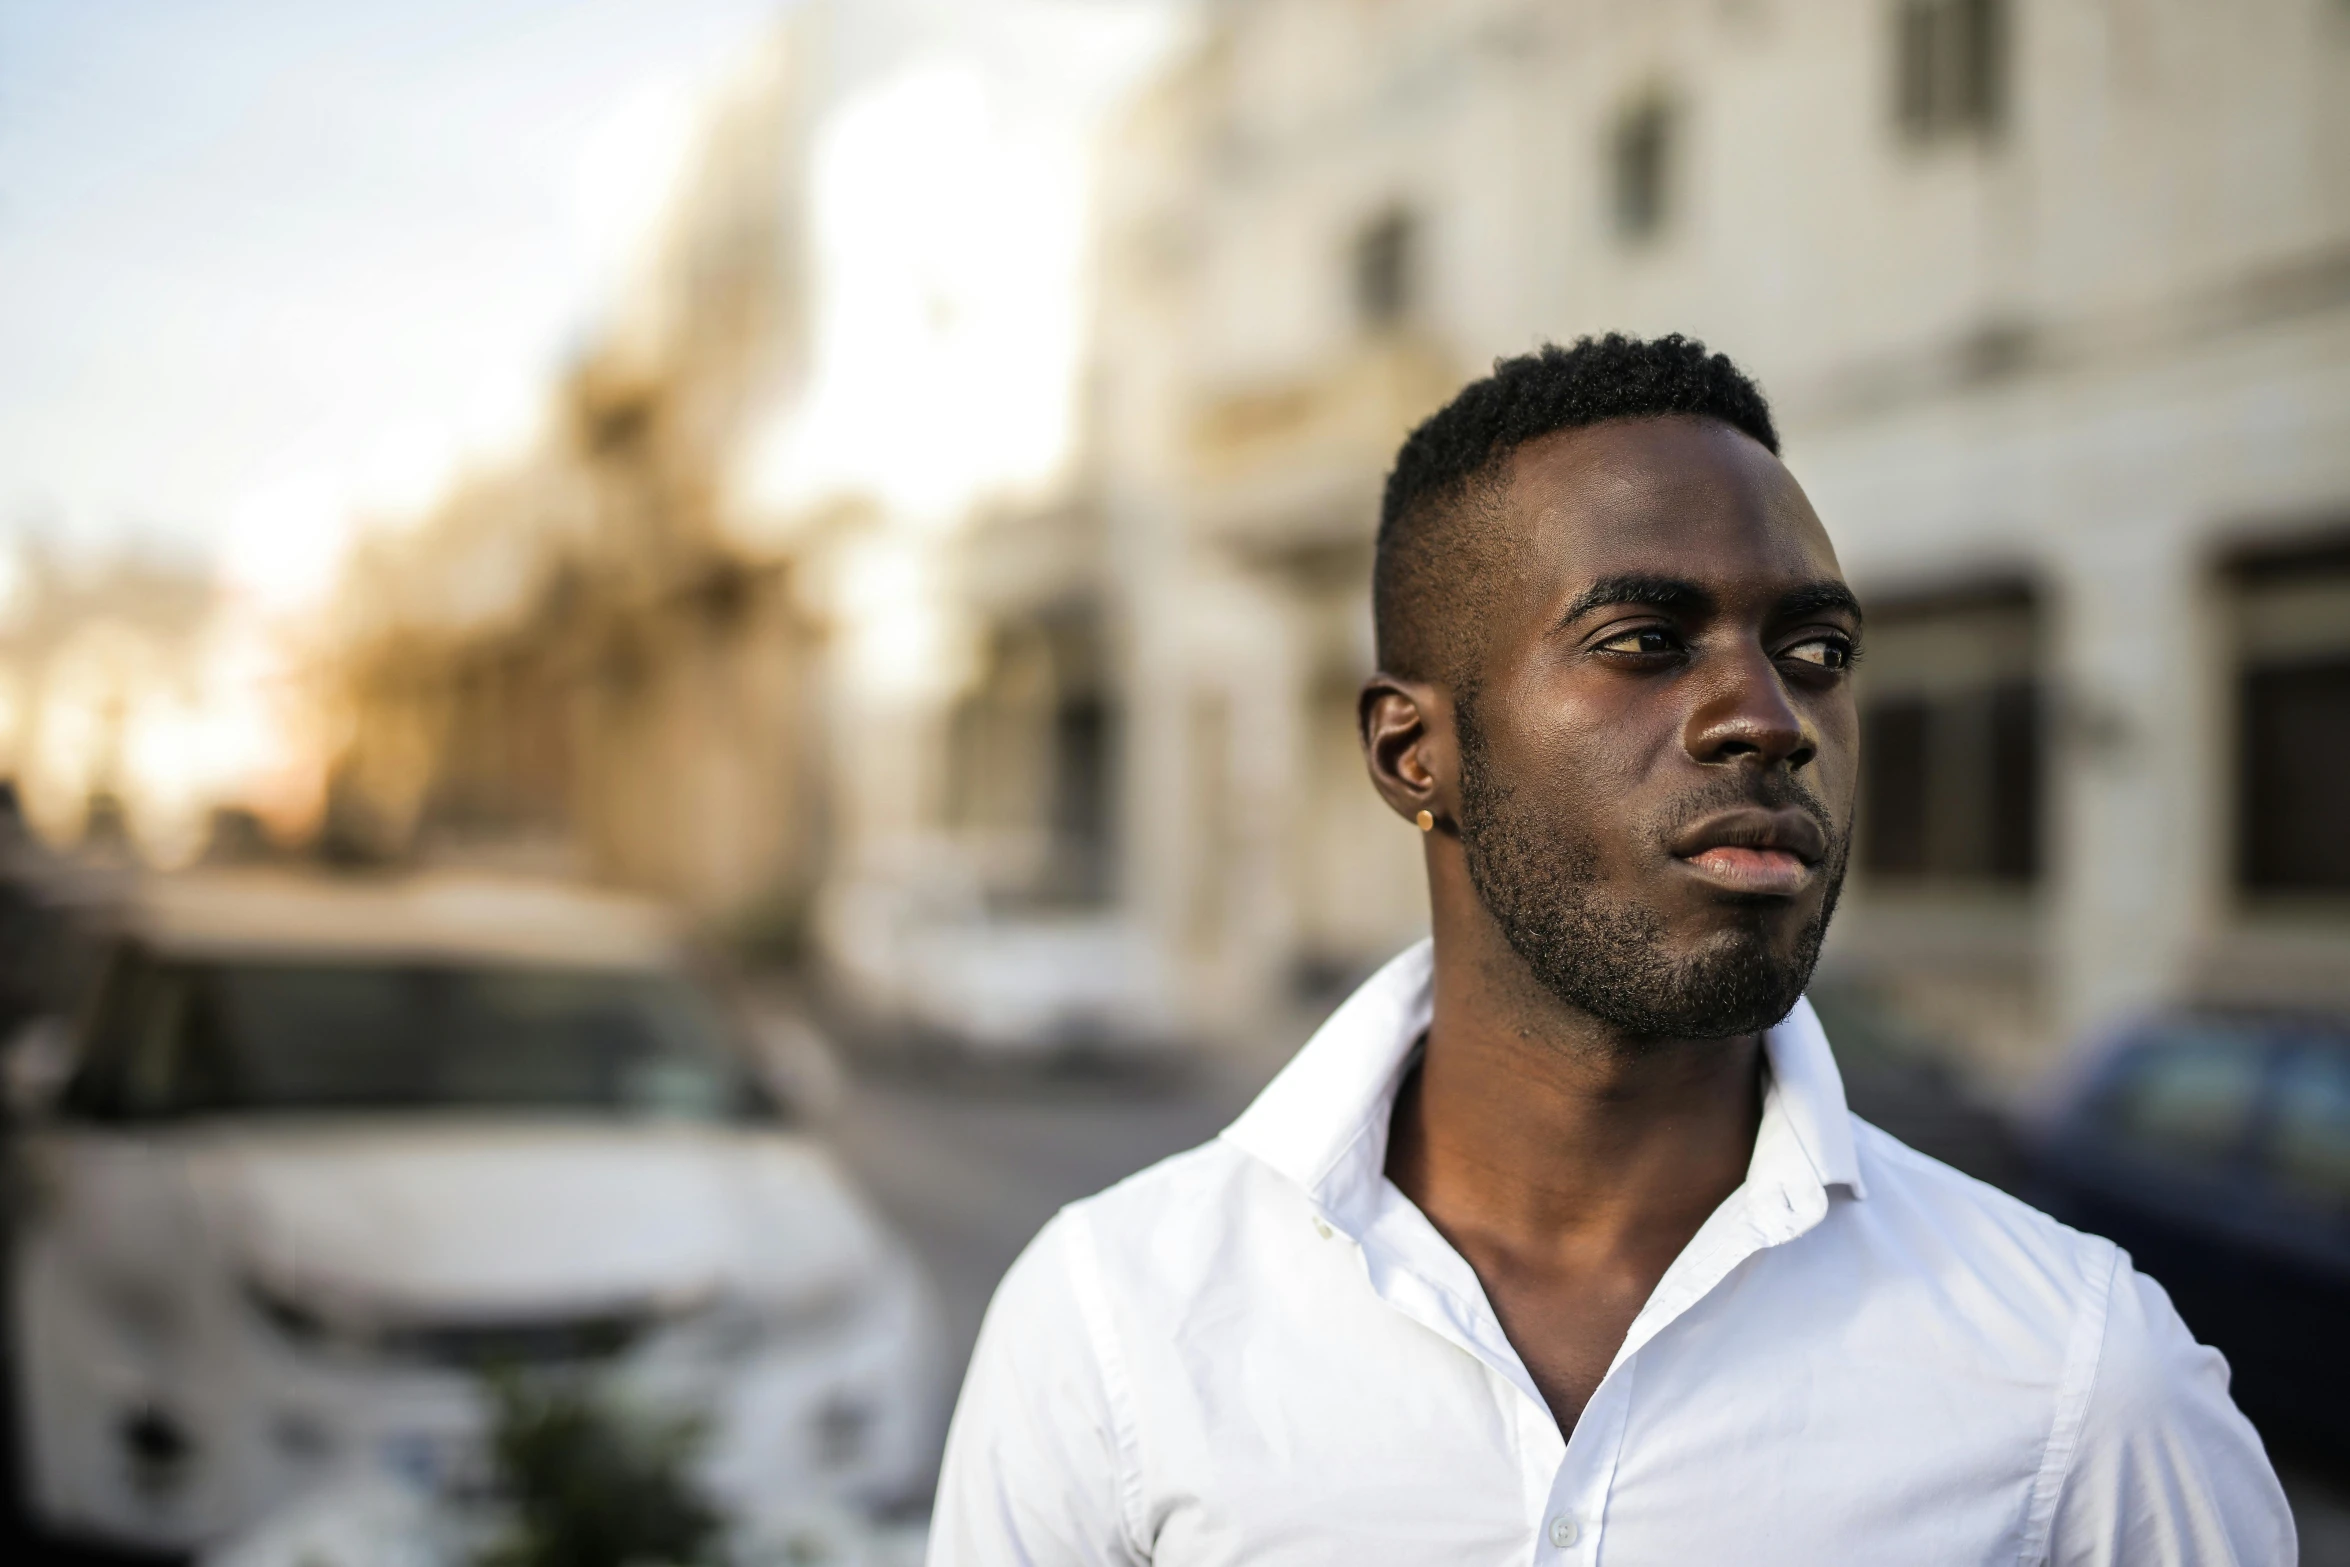 a man in a white shirt standing on a city street, pexels contest winner, les nabis, dark skin tone, headshot profile picture, young greek man, black